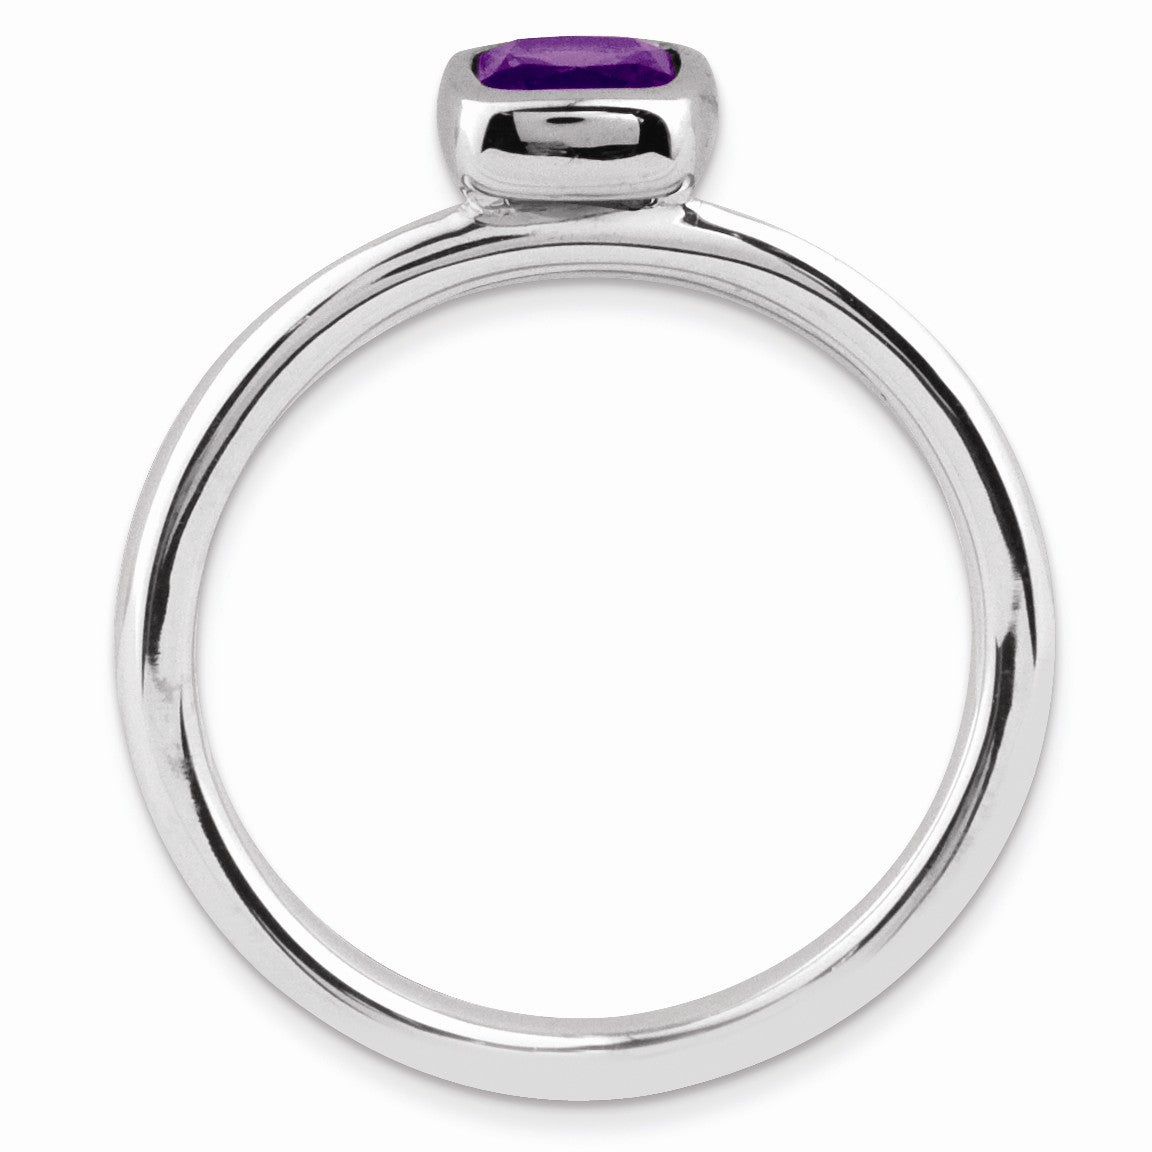 Alternate view of the Sterling Silver &amp; Amethyst Stackable 5mm Cushion Cut Solitaire Ring by The Black Bow Jewelry Co.